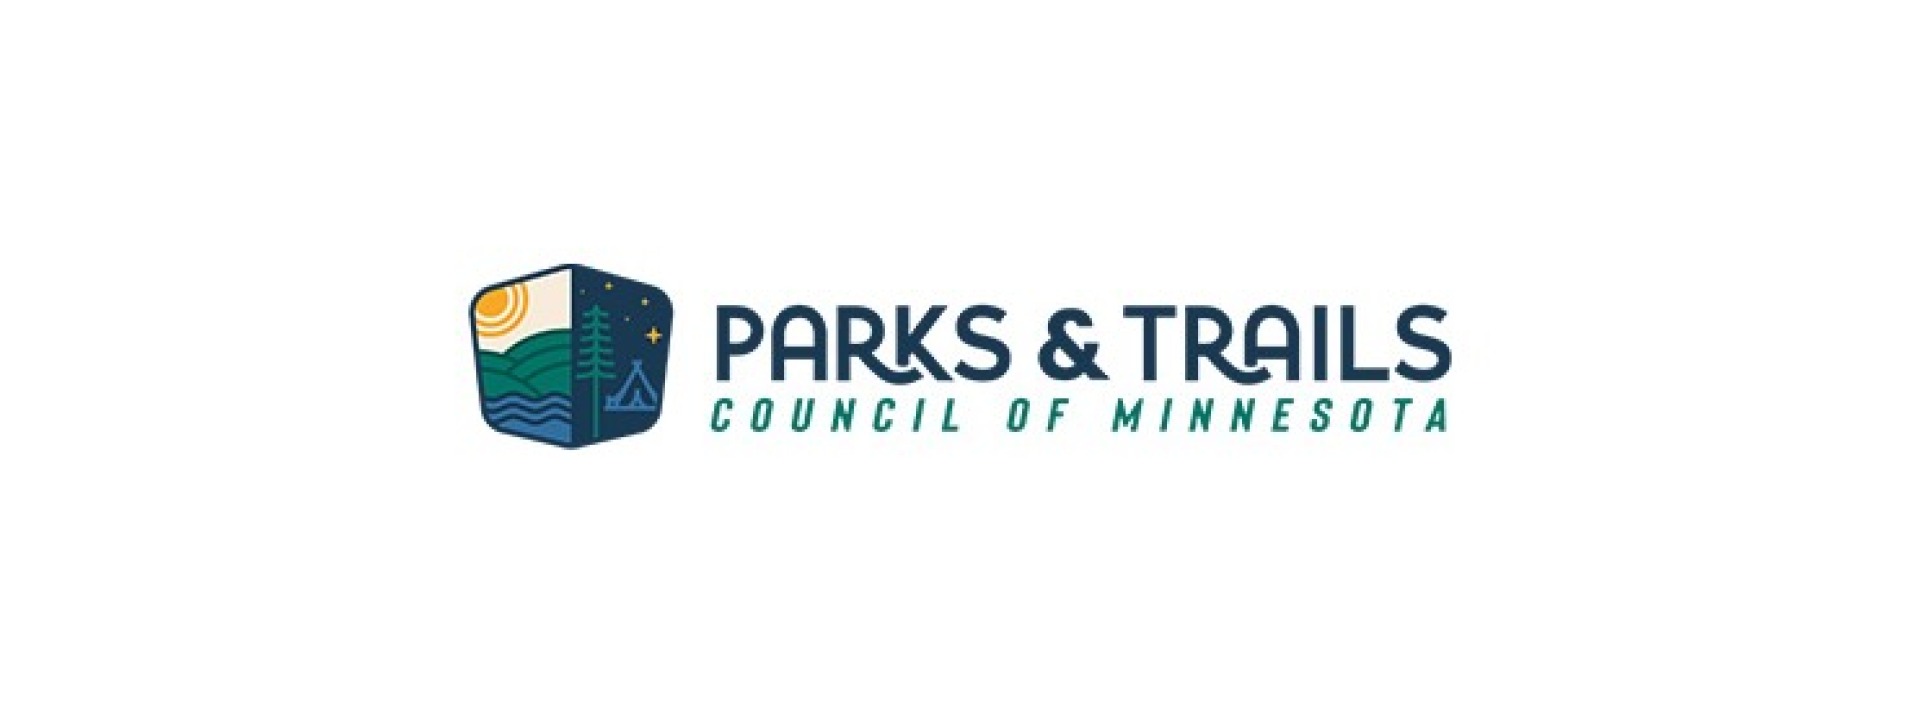 The parks and trails council of Minnesota logo.